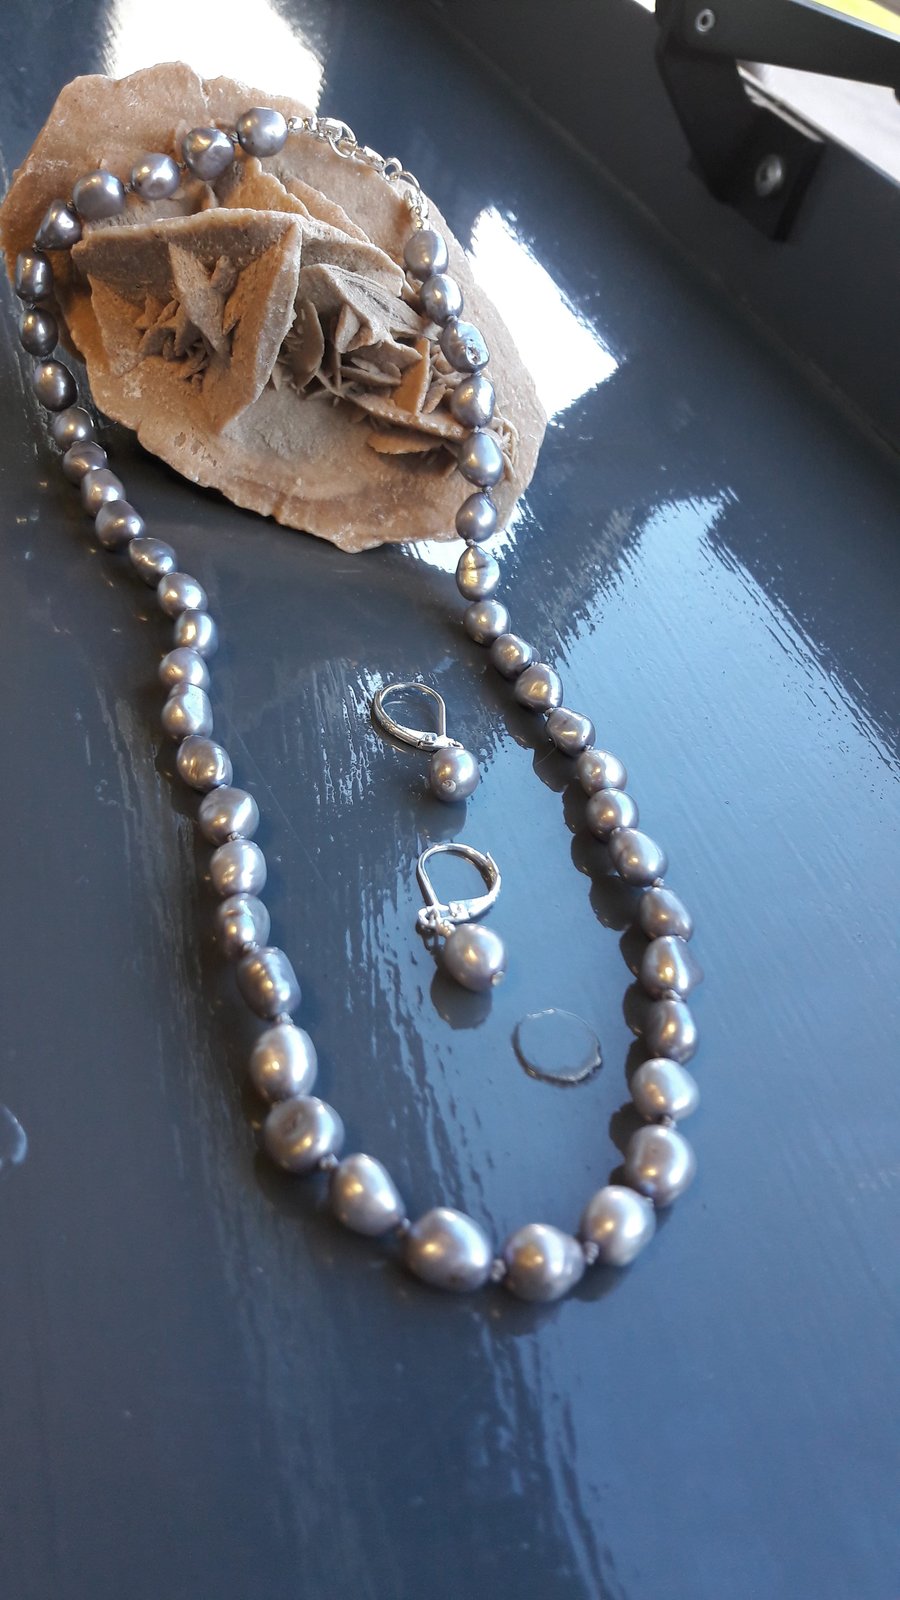 Silver Freshwater Cultured Pearls knotted on Grey Silk Necklace and Earrings